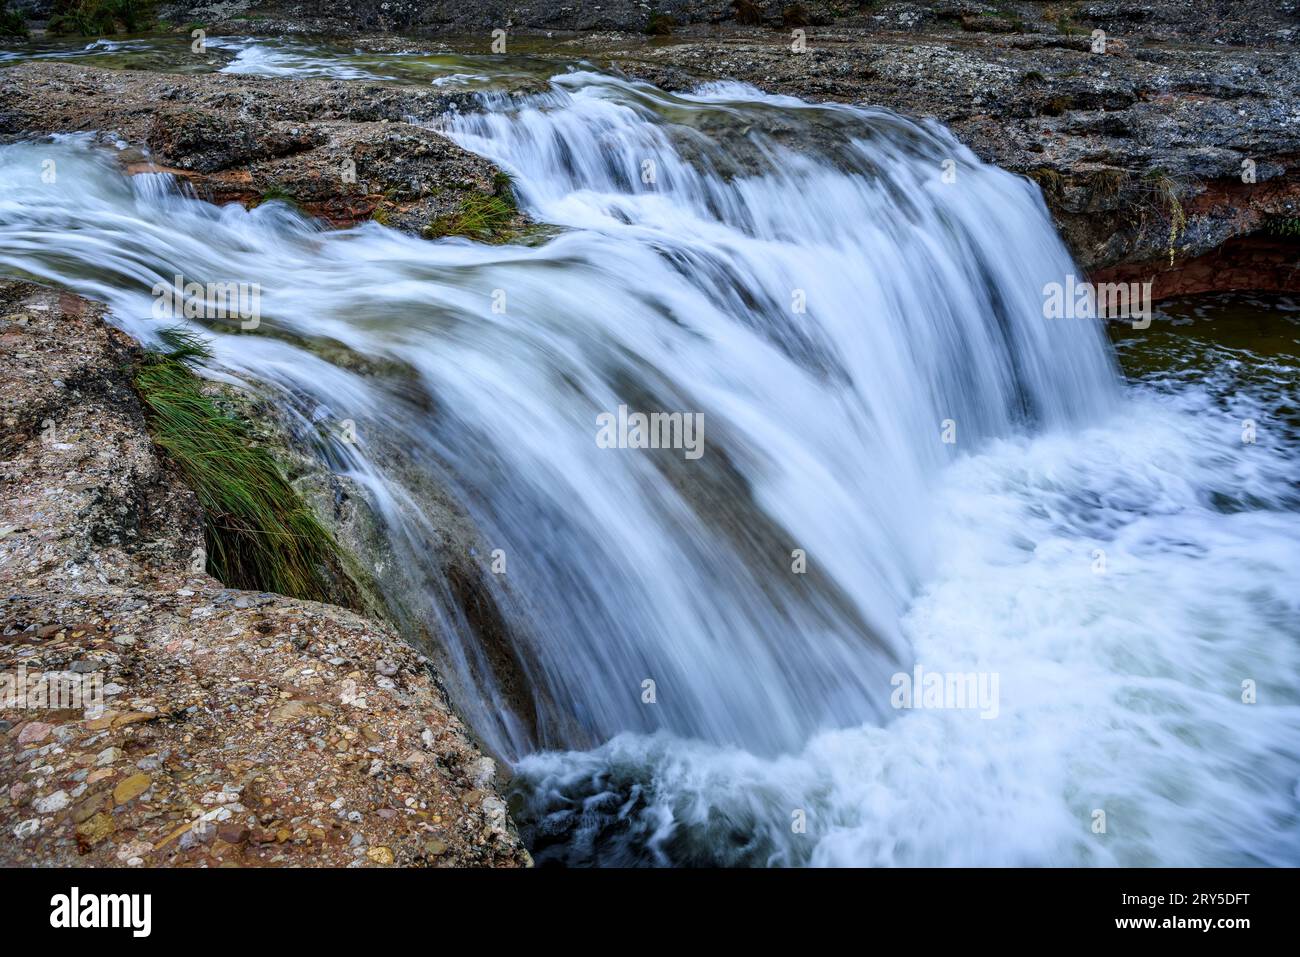 Toll del Vidre waterfall in the Algars river, in the Els Ports / Los Puertos natural park, with a large flow after heavy rains (Tarragona, Spain) Stock Photo